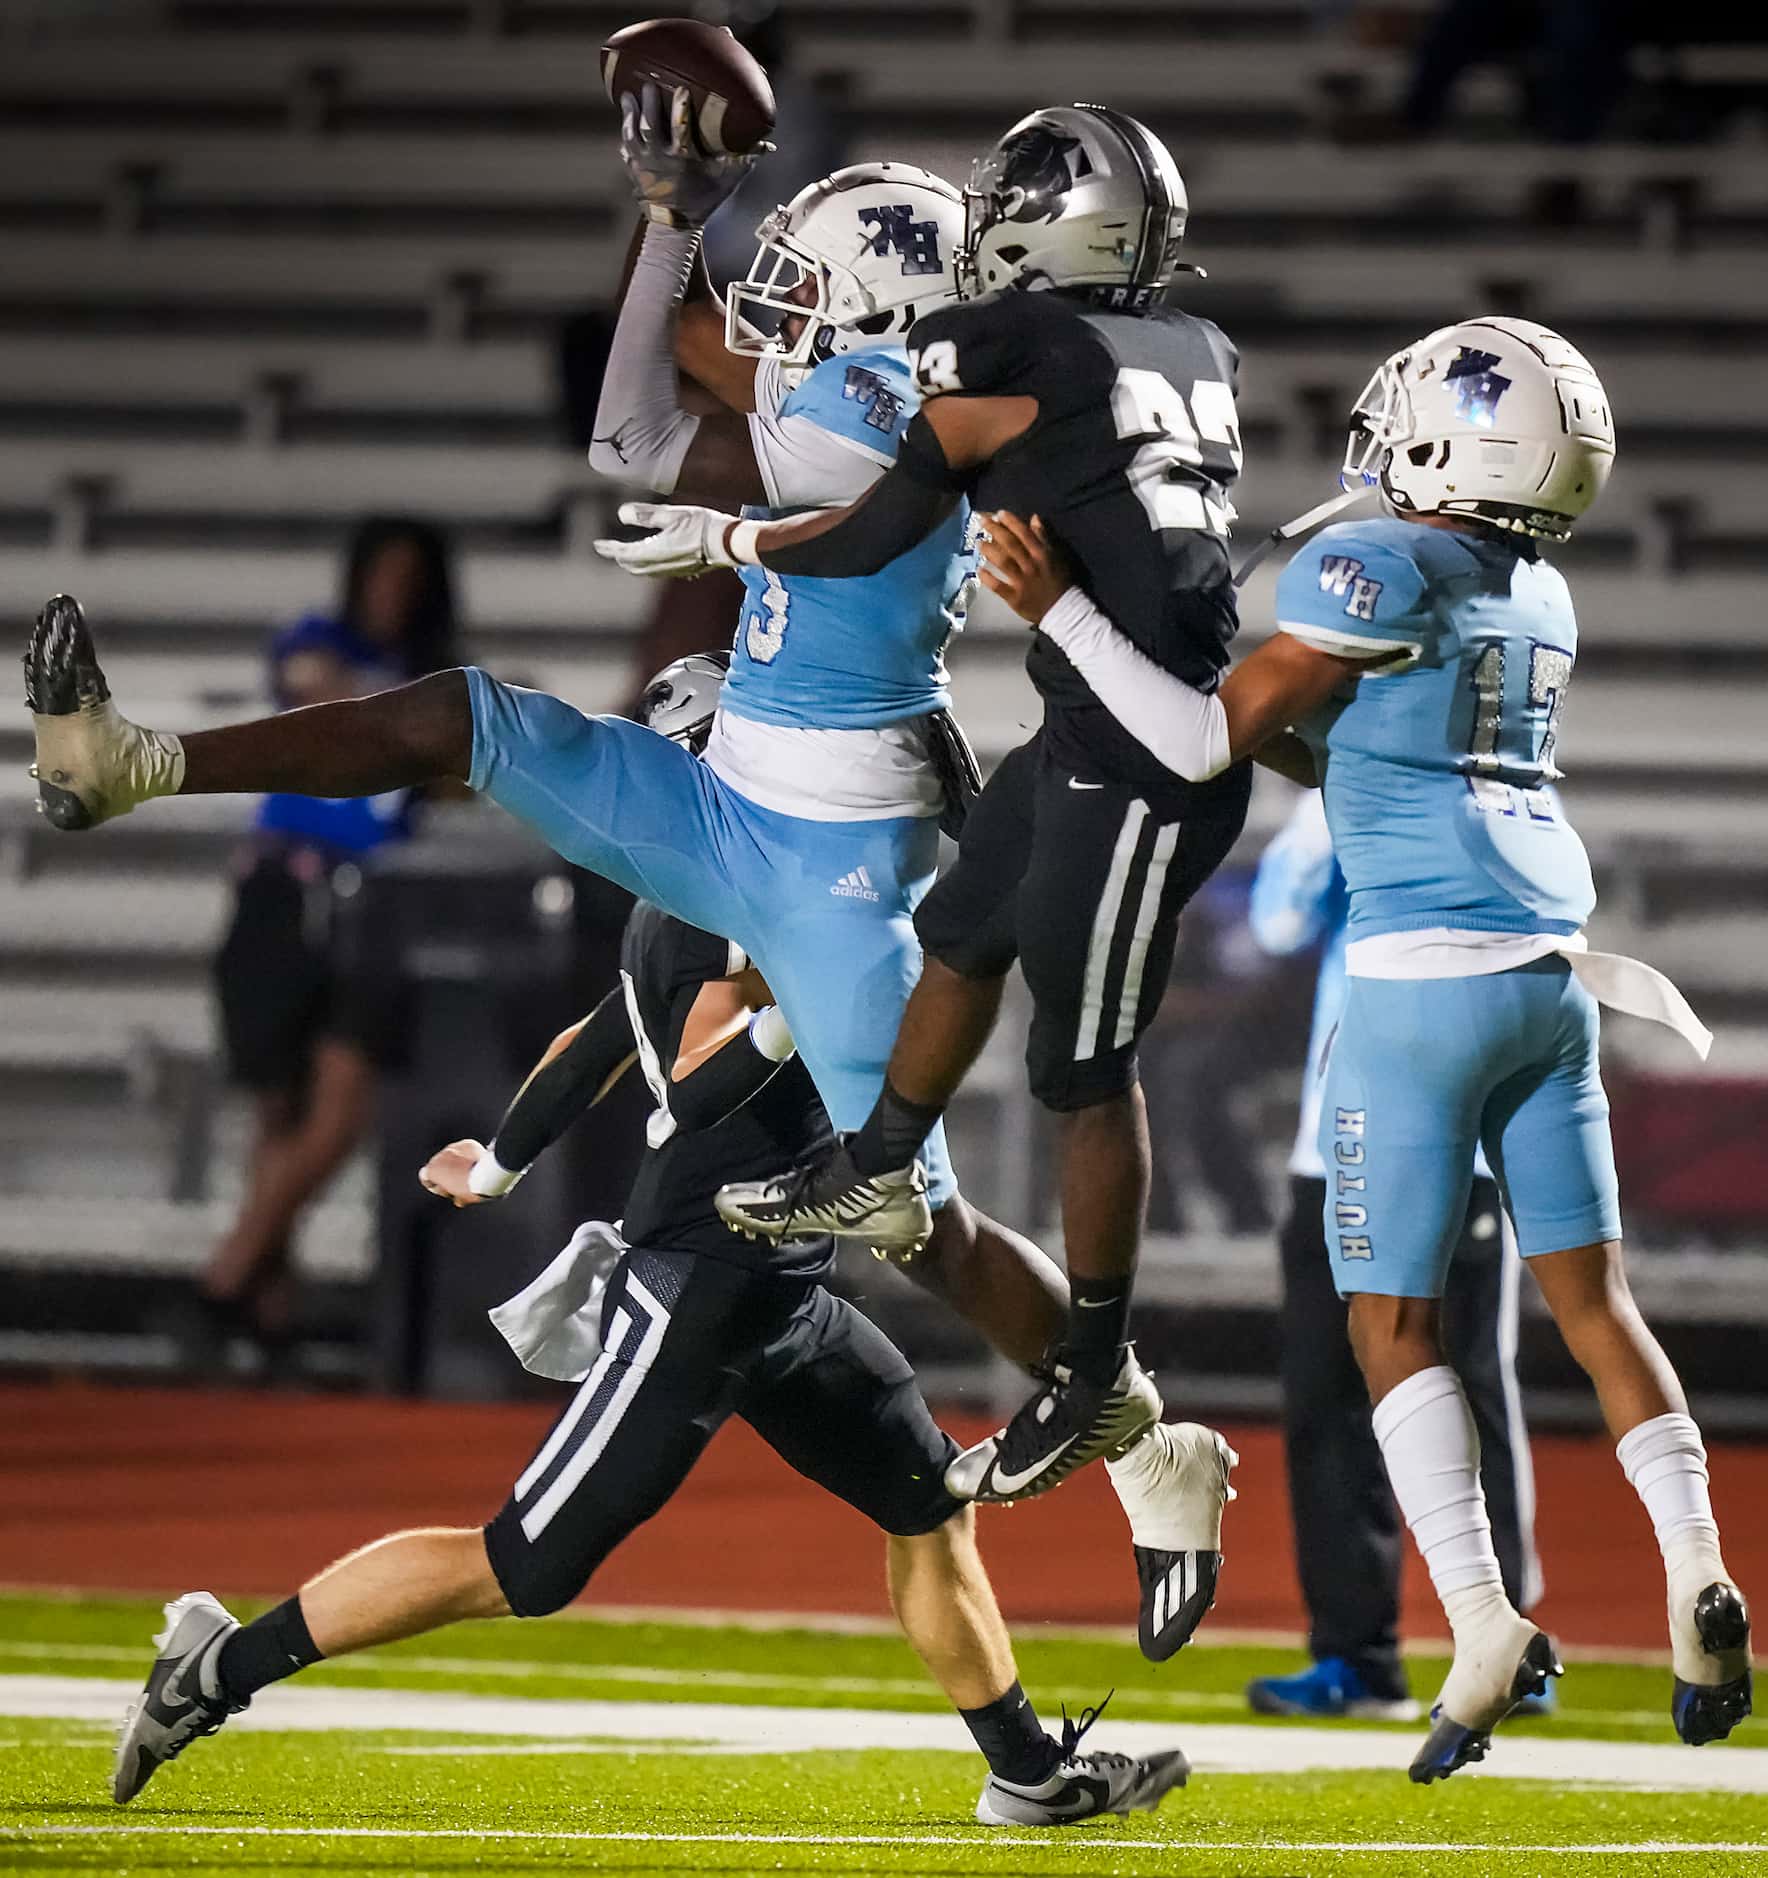 Wilmer-Hutchins wide receiver Jayvon Roe catches a pass as Panther Creek   defensive back...